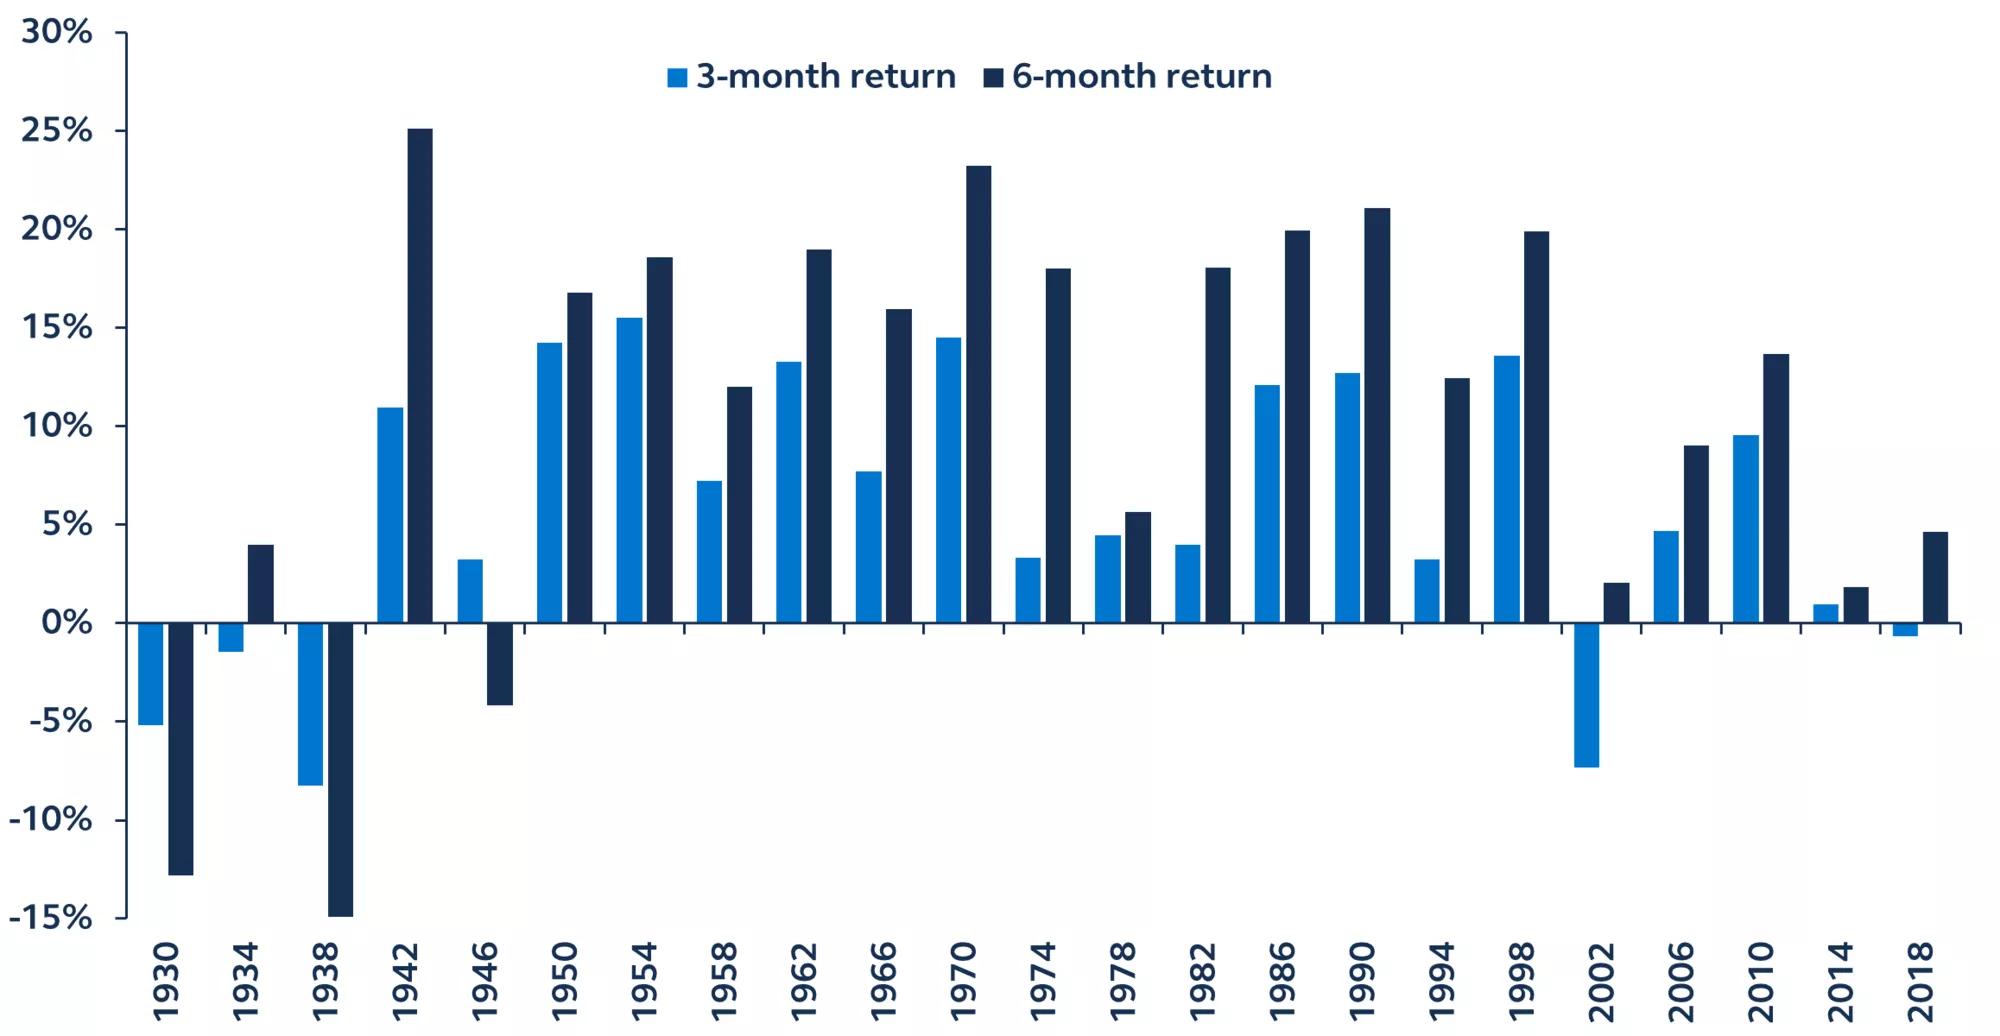 Bar chart showing equity market performance in the S&P 500 following midterm elections from 1930-2018 by three and 6-month return rates